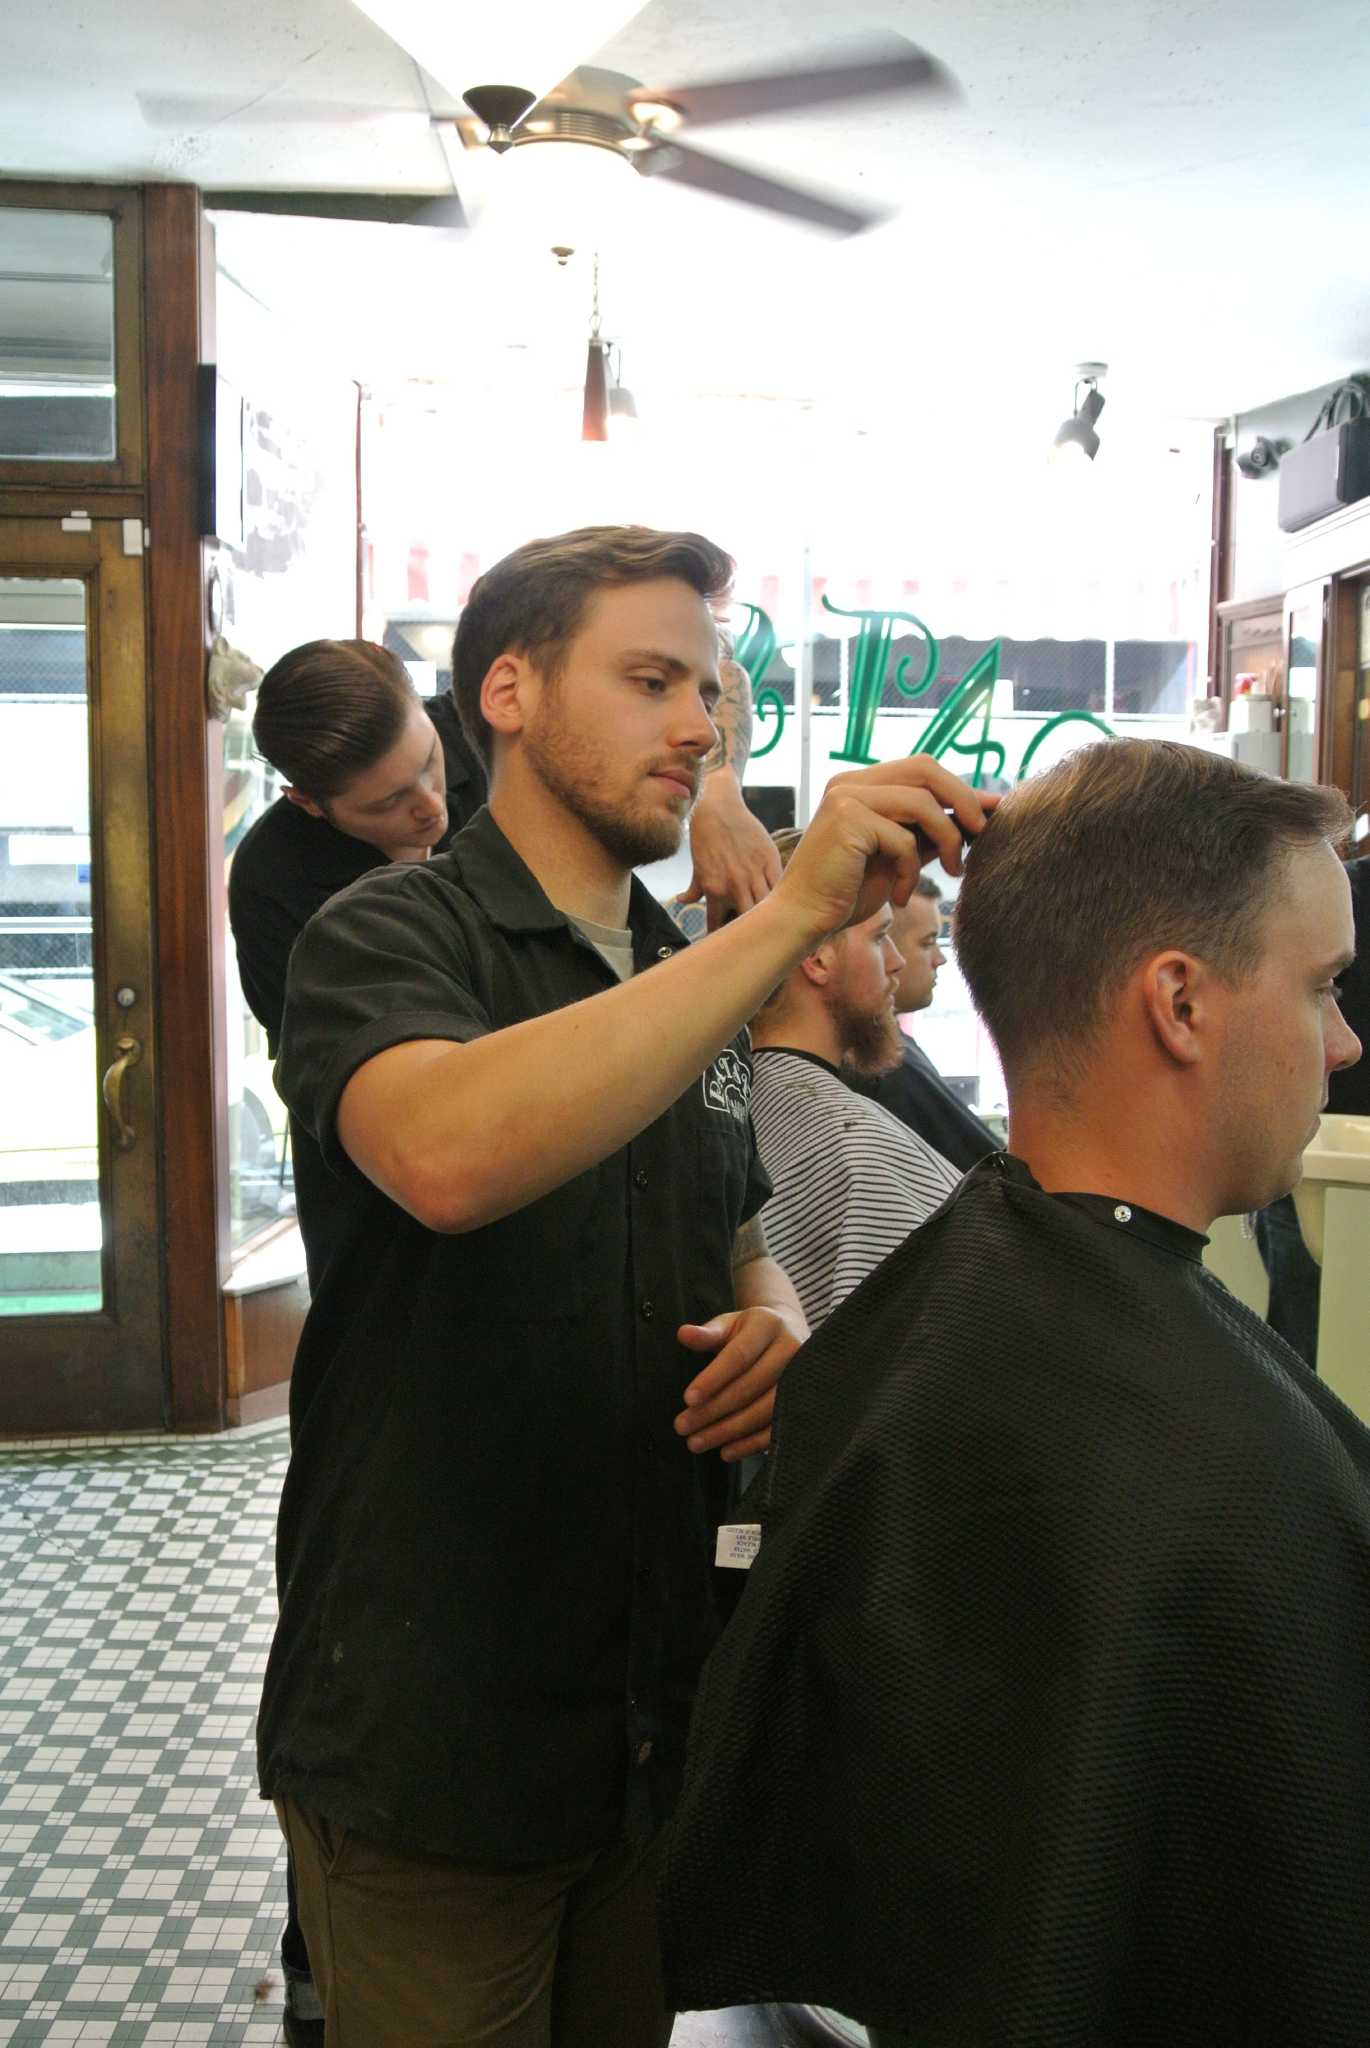 Albany's Barber Shop Since 1930 - Patsy's Barber Shop